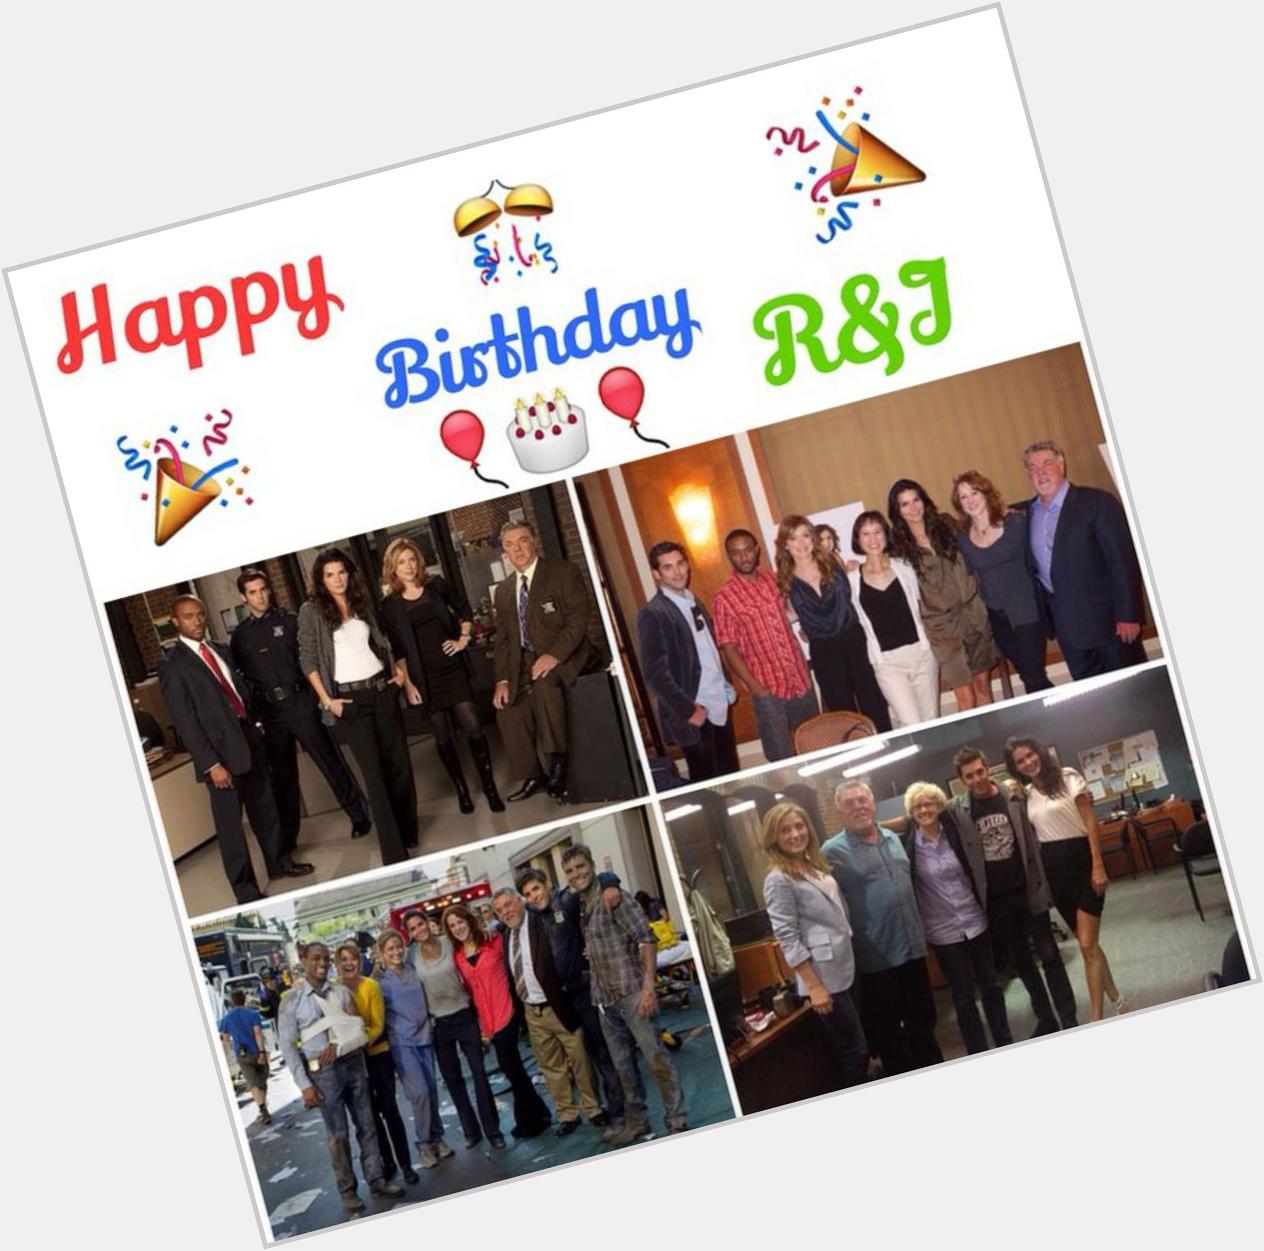    HAPPY BIRTHDAY RIZZOLI & ISLES!!!!  THIS SHOW MEANS SO MUCH  THANK YOU 